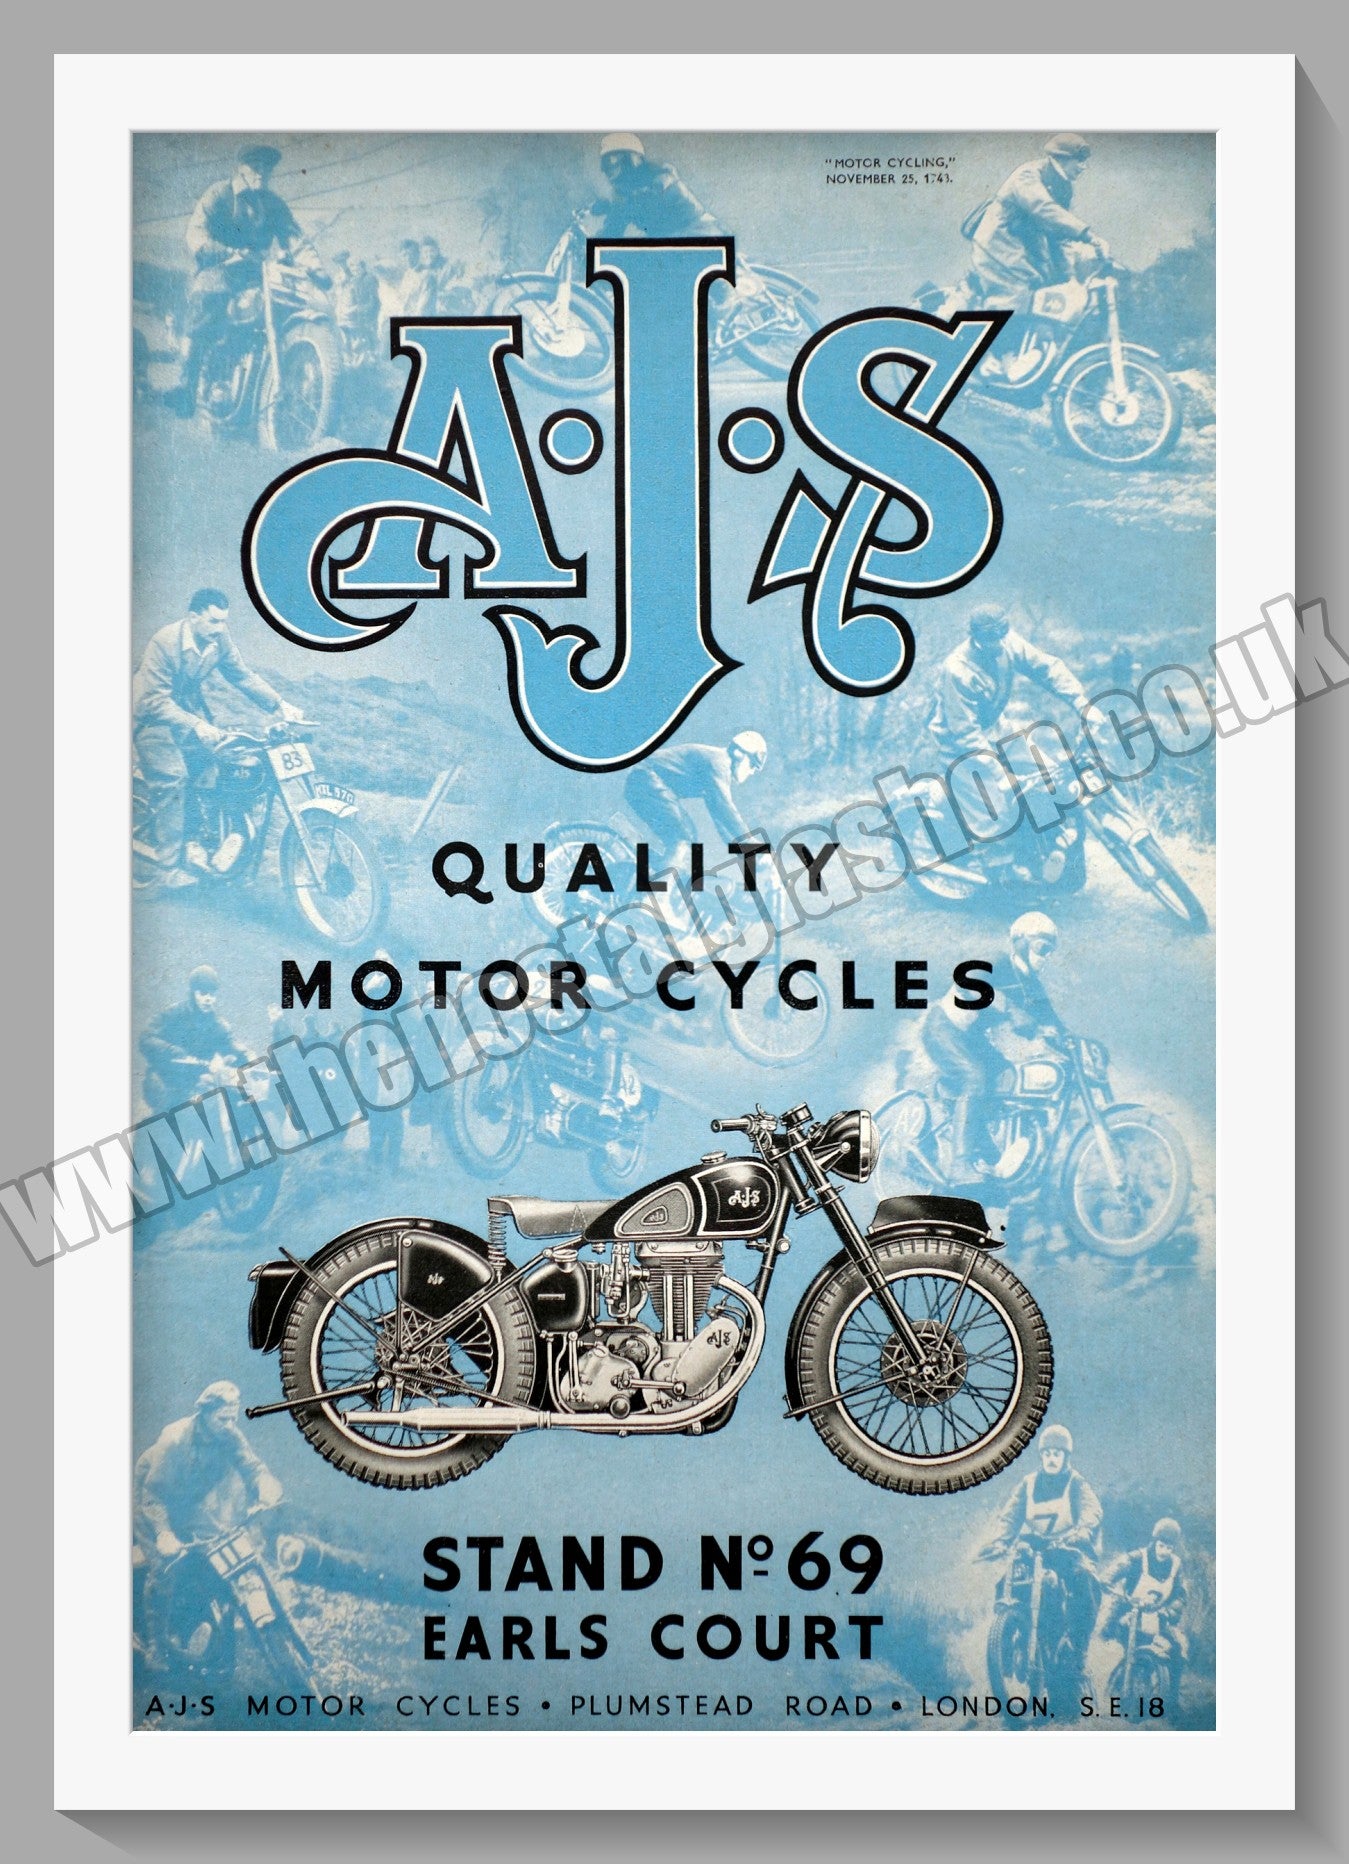 A.J.S Motorcycles at Earls Court. Original Advert 1943 (ref AD56867)